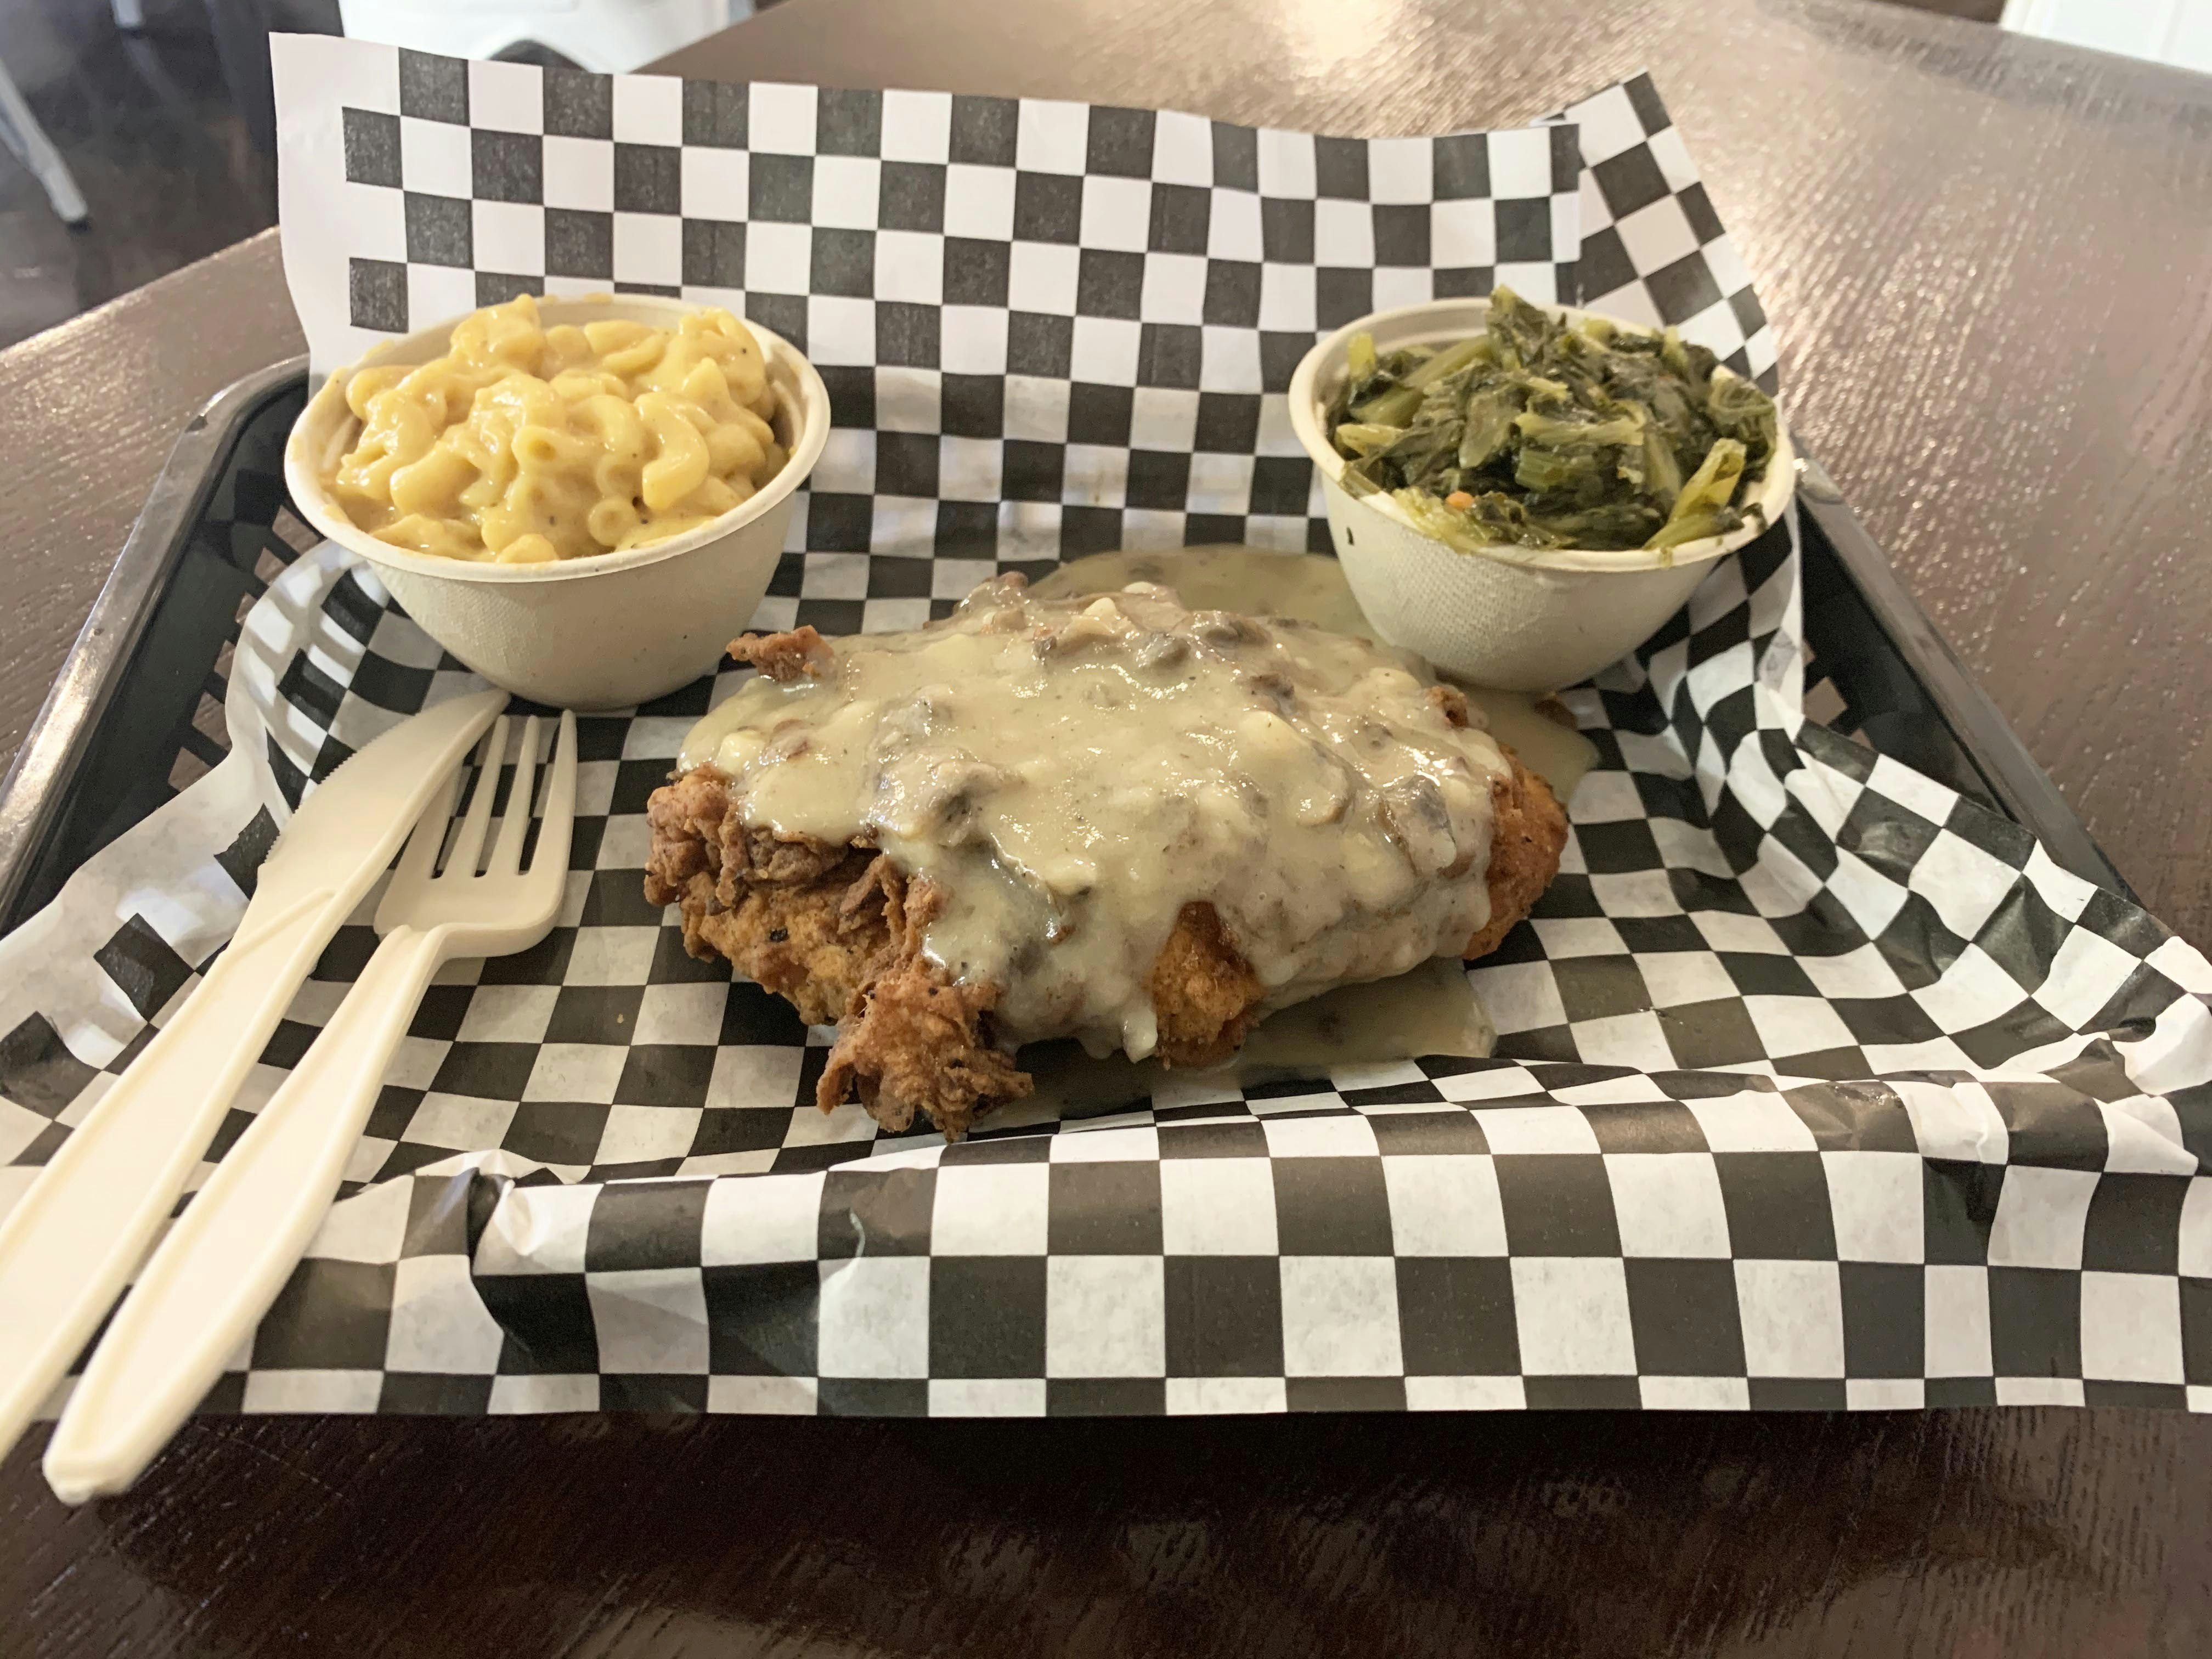 Small bowls of vegan mac and cheese, turnip greens sit on opposite sides of small plastic tray lined with black and white checkered paper. In the center is vegan fried chicken smothered in mushroom sauce. A plastic knife and fork rest on the left-hand side of the tray.